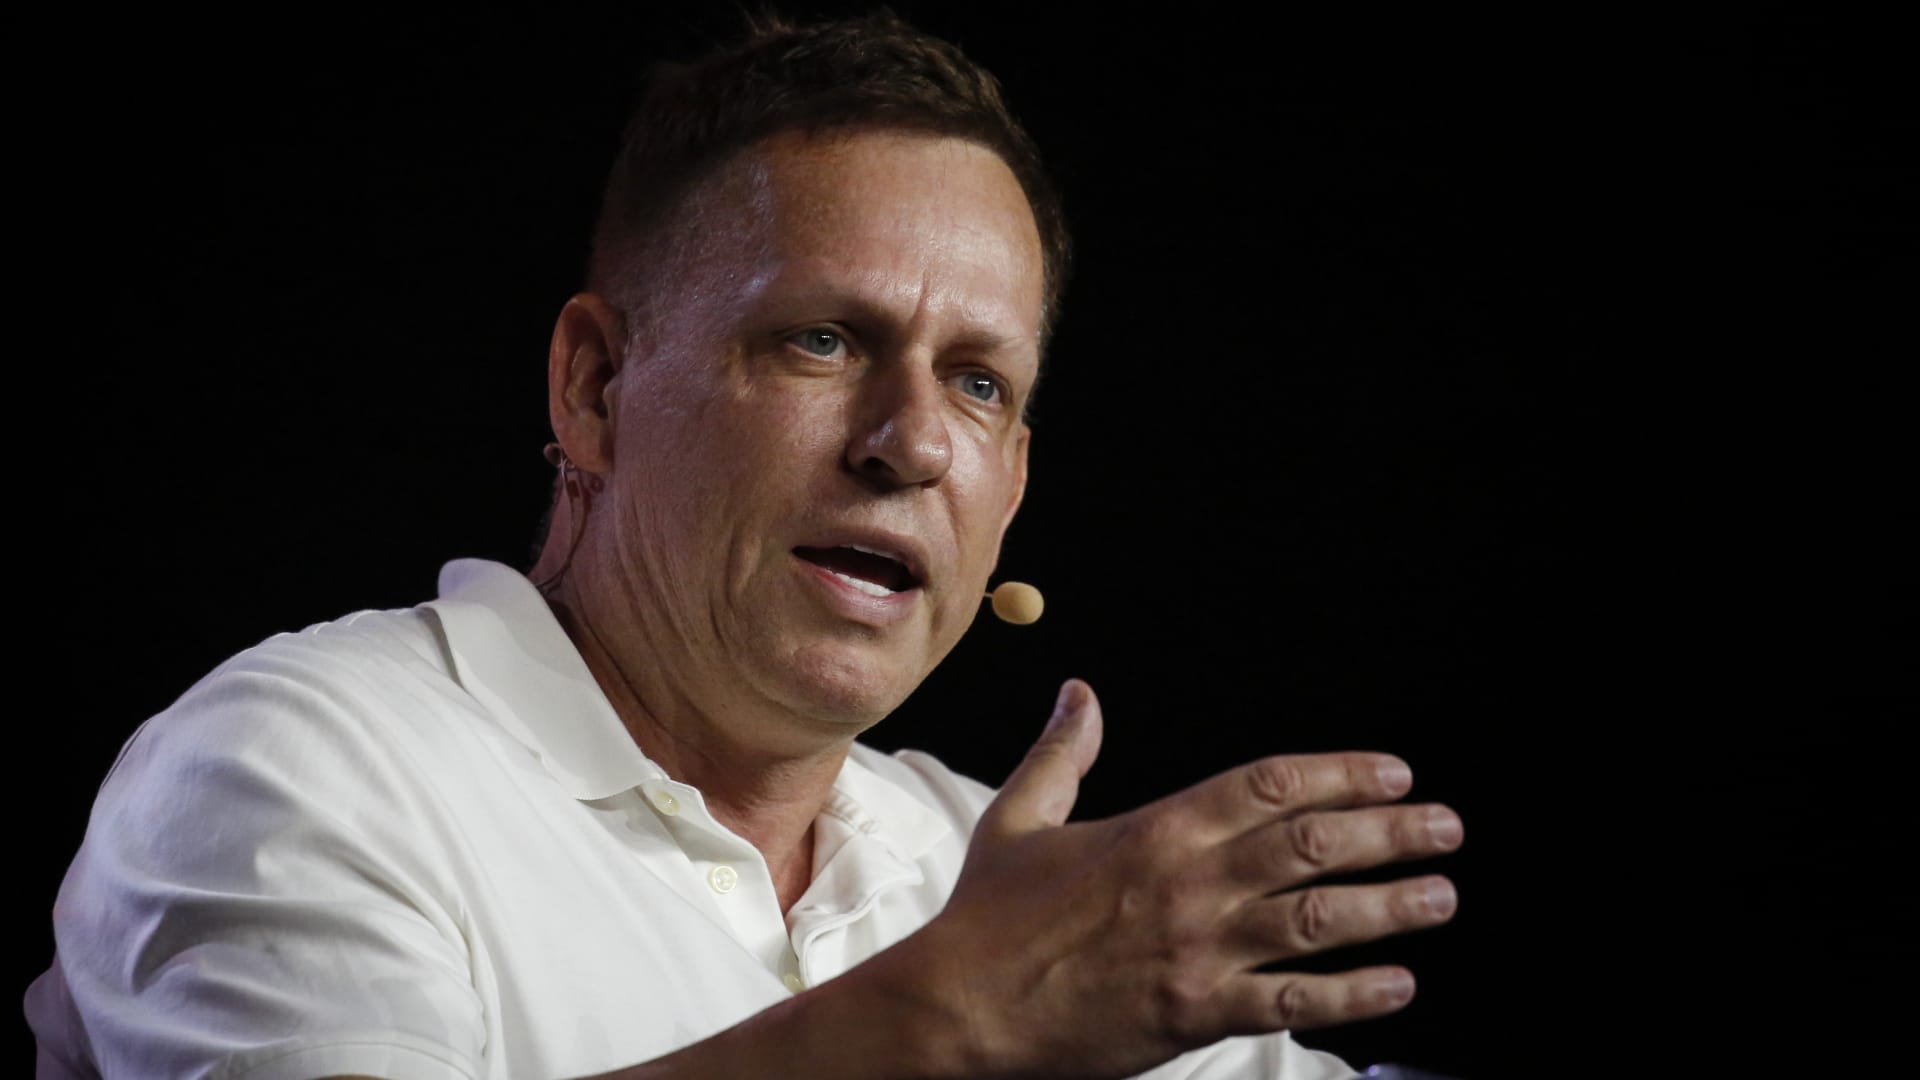 Peter Thiel's luxury New Zealand lodge should be rejected, council planner says